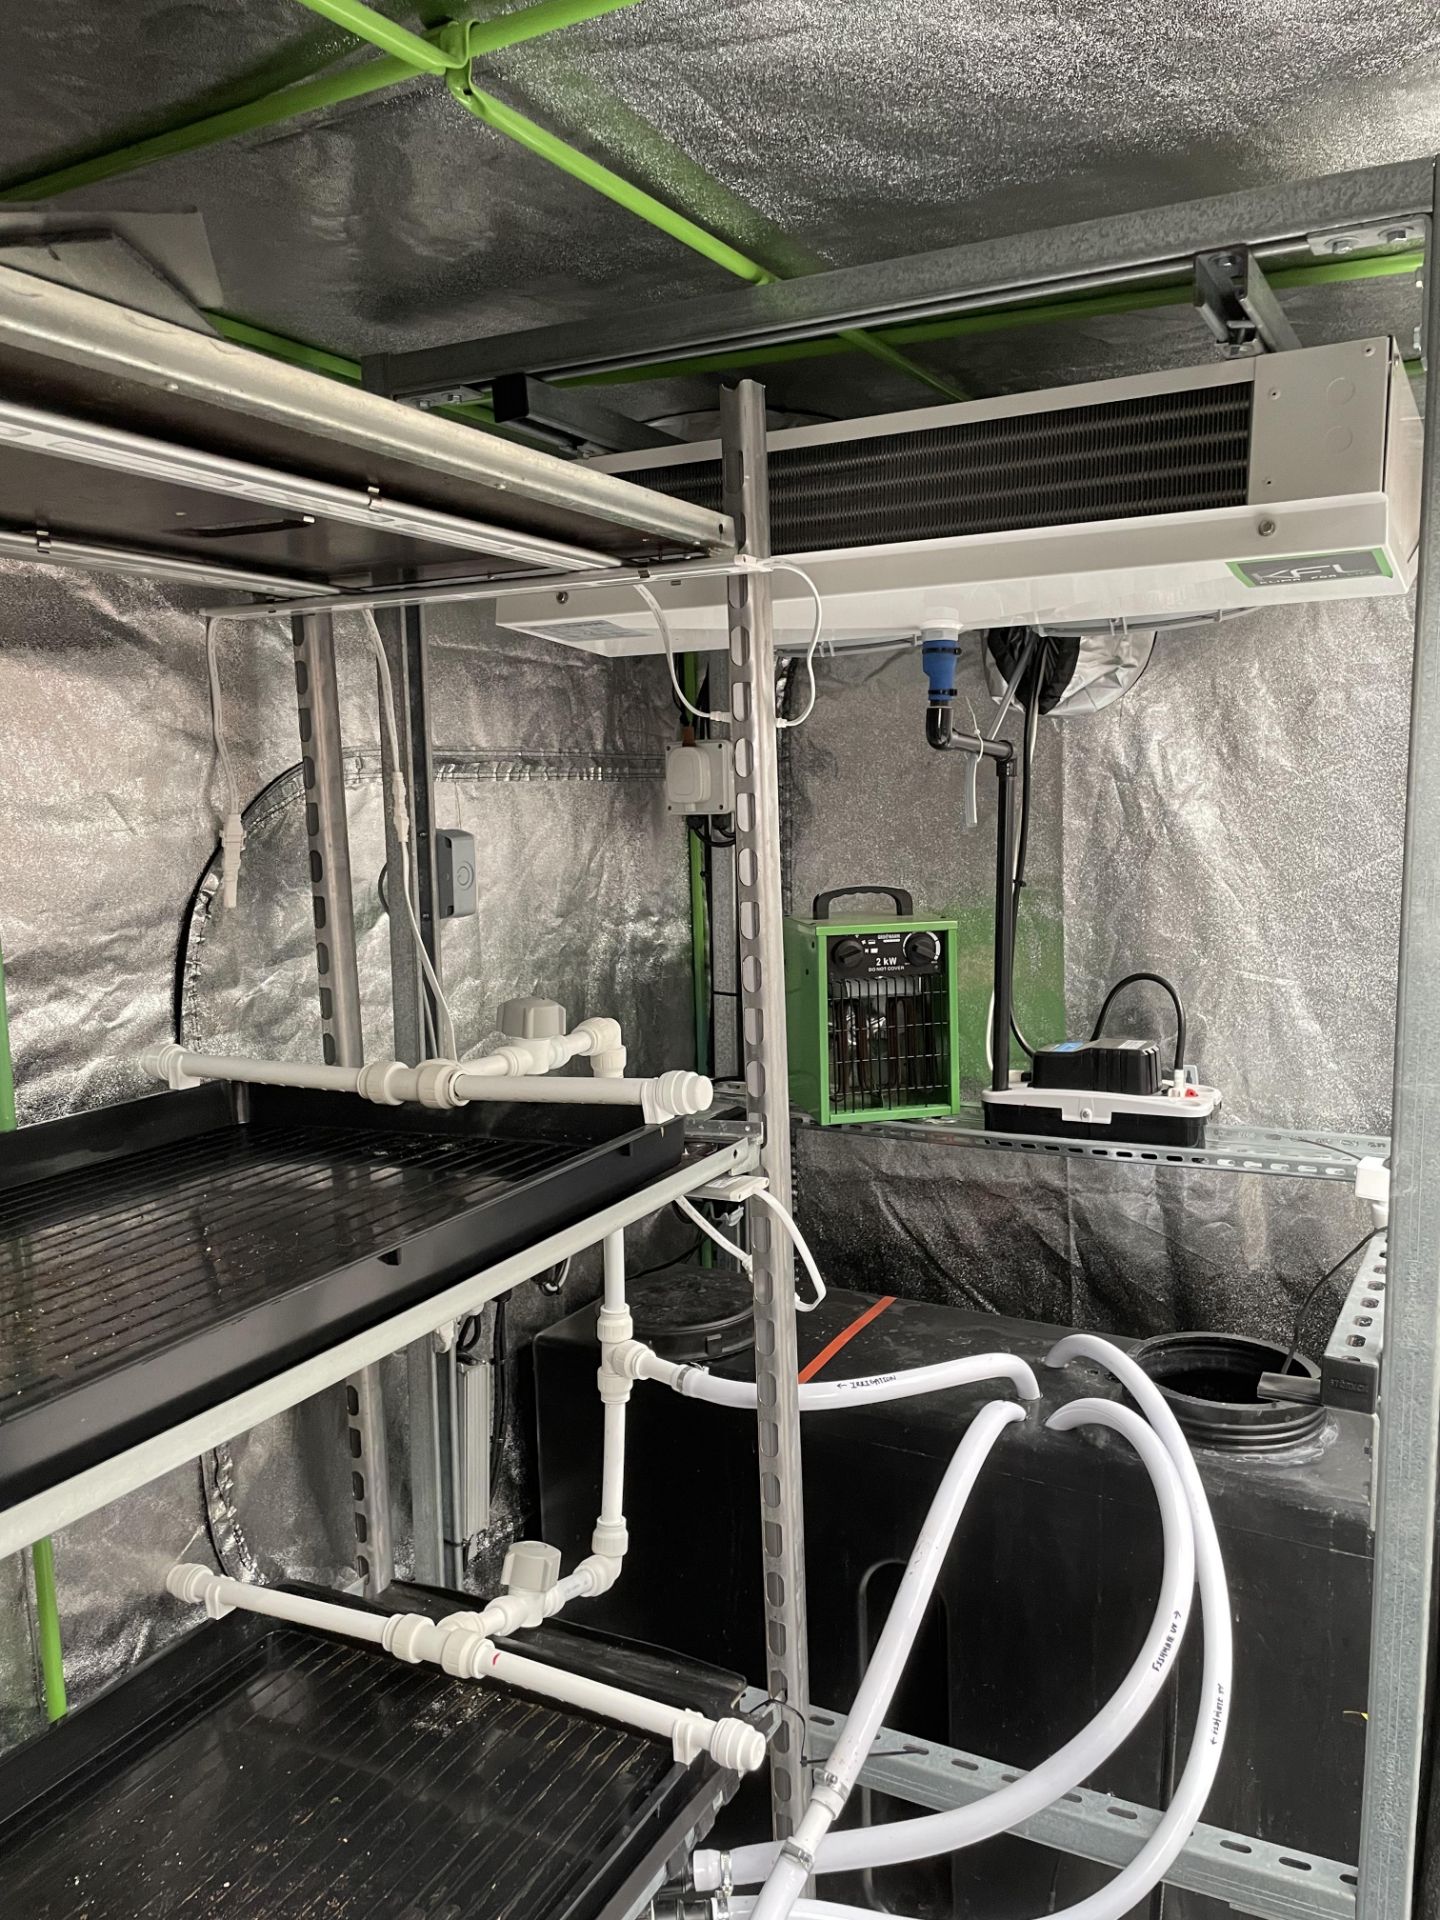 2.4 x 1.2 x 2M Horticultural / Hydroponic Growing Tent Including: Eider Controls Dehumidifier and Da - Image 3 of 6